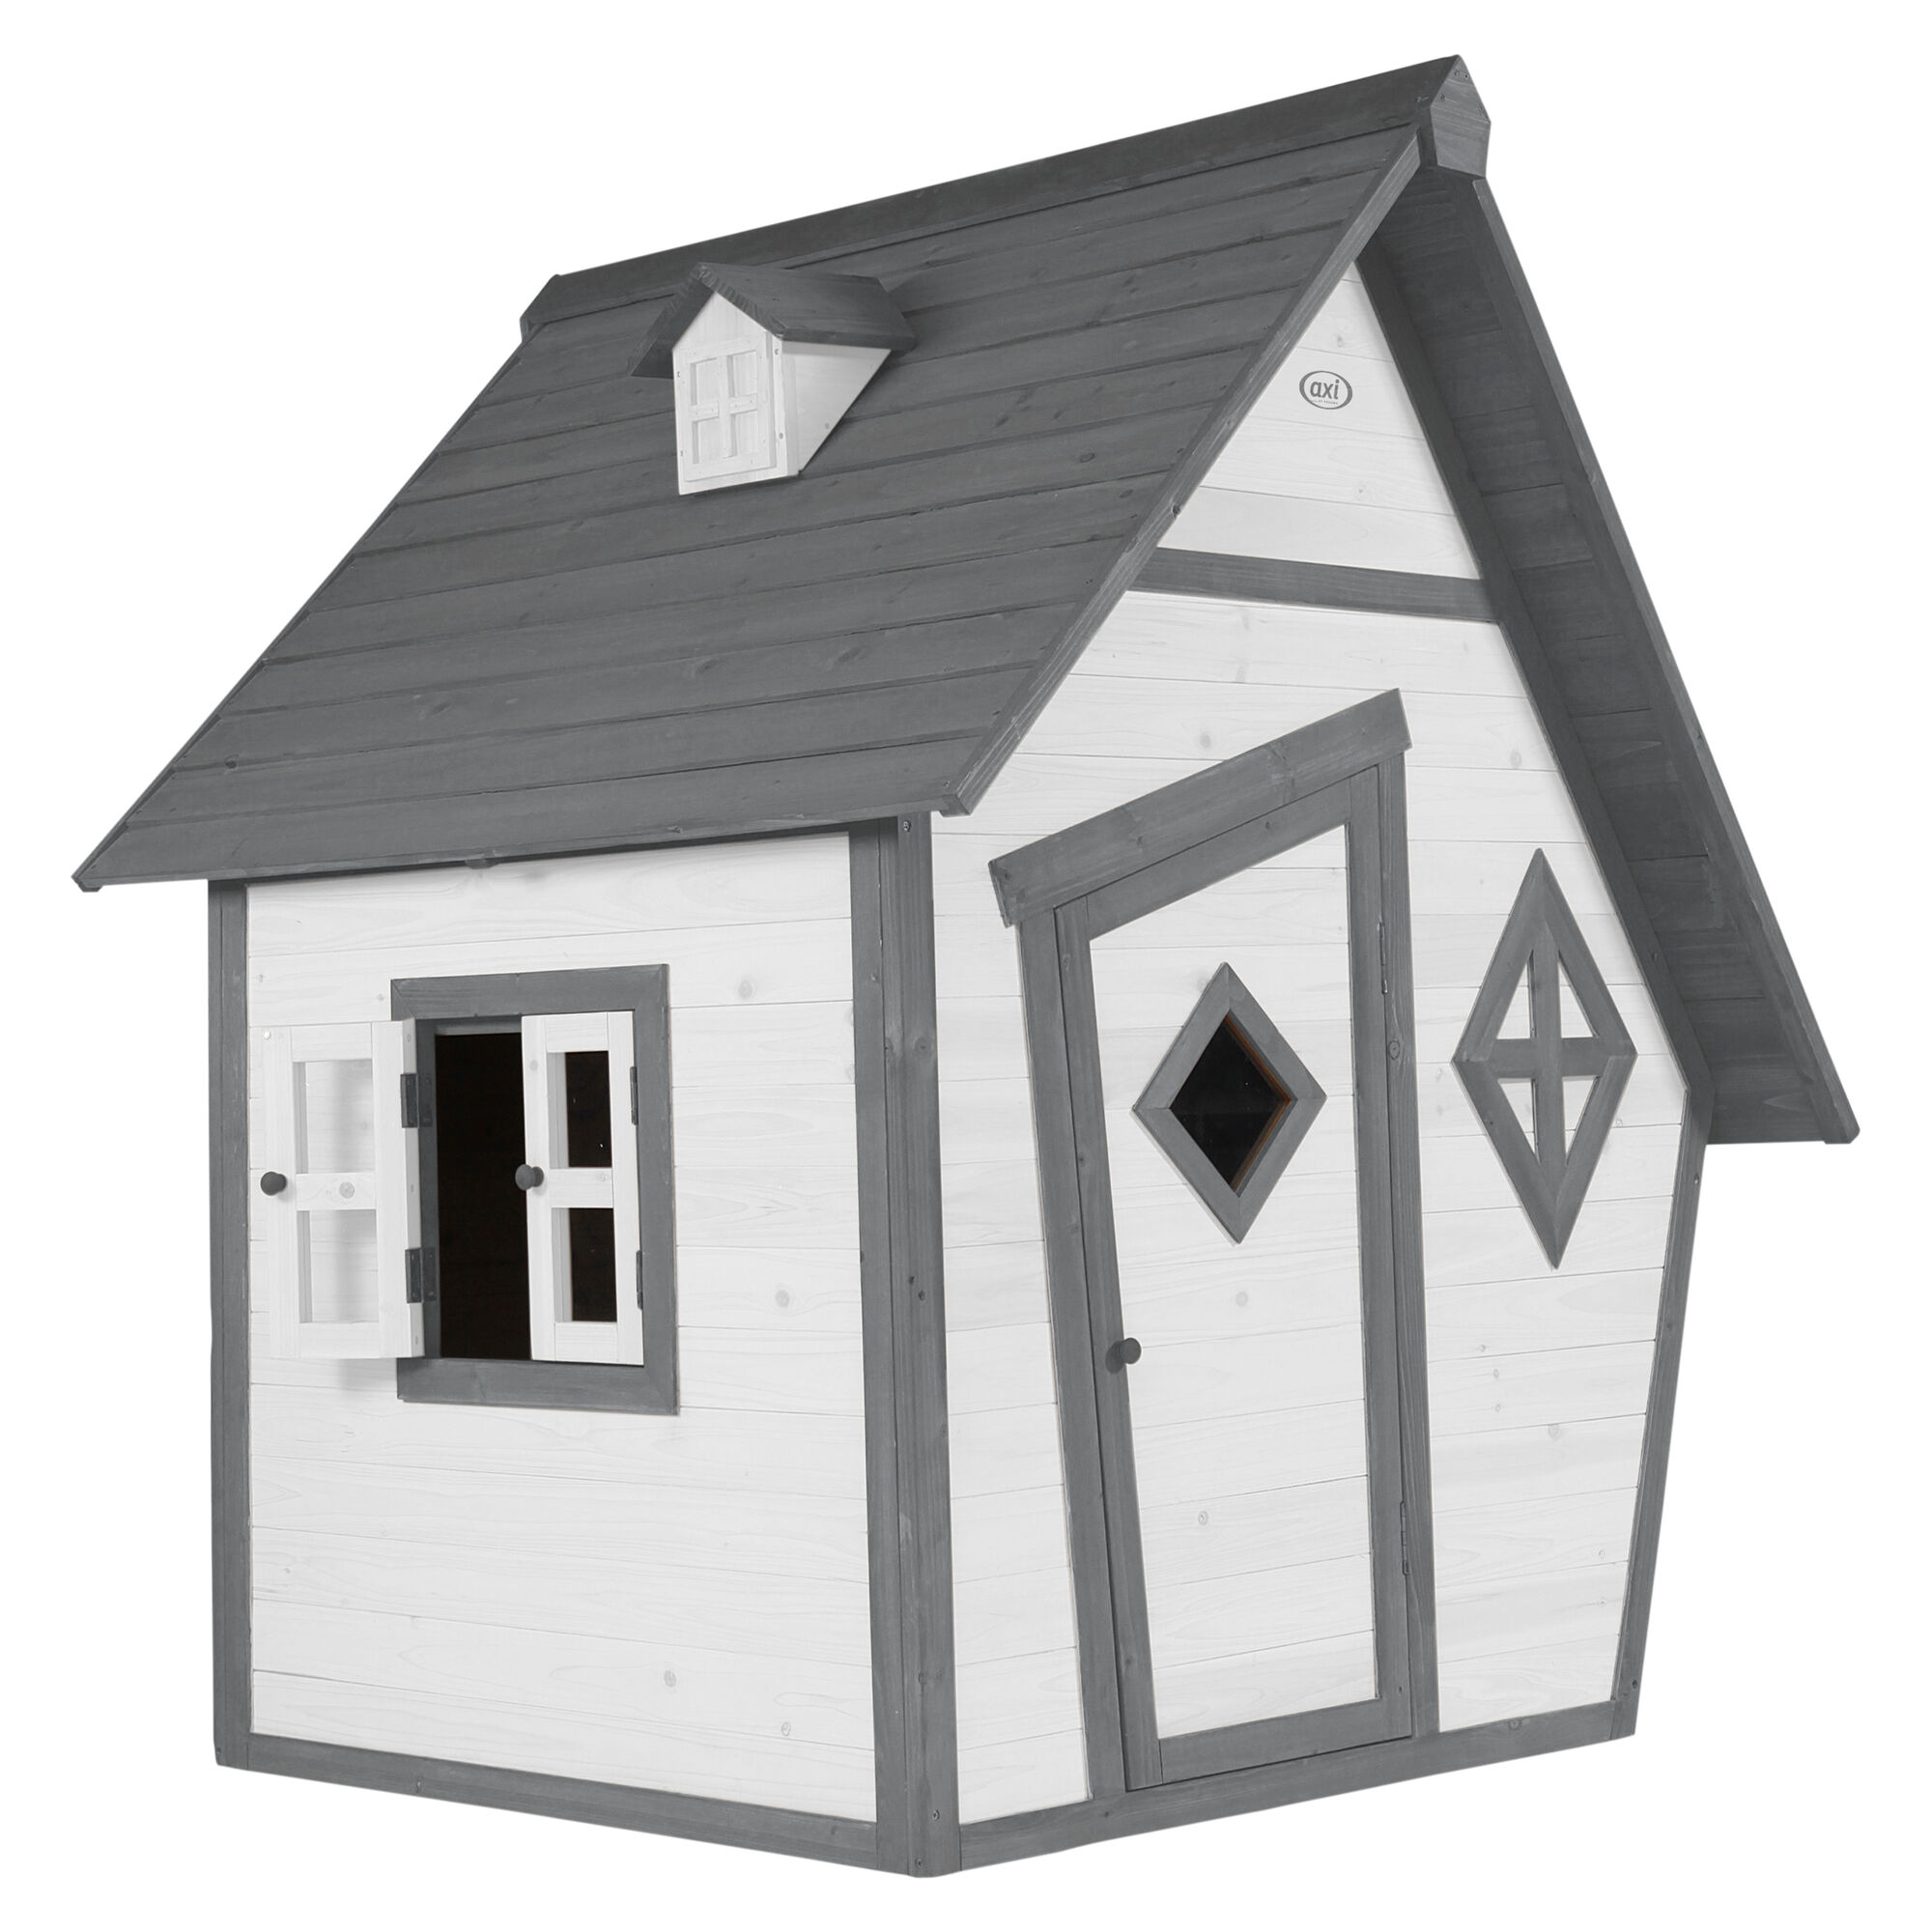 productfoto AXI Cabin Playhouse Grey/white